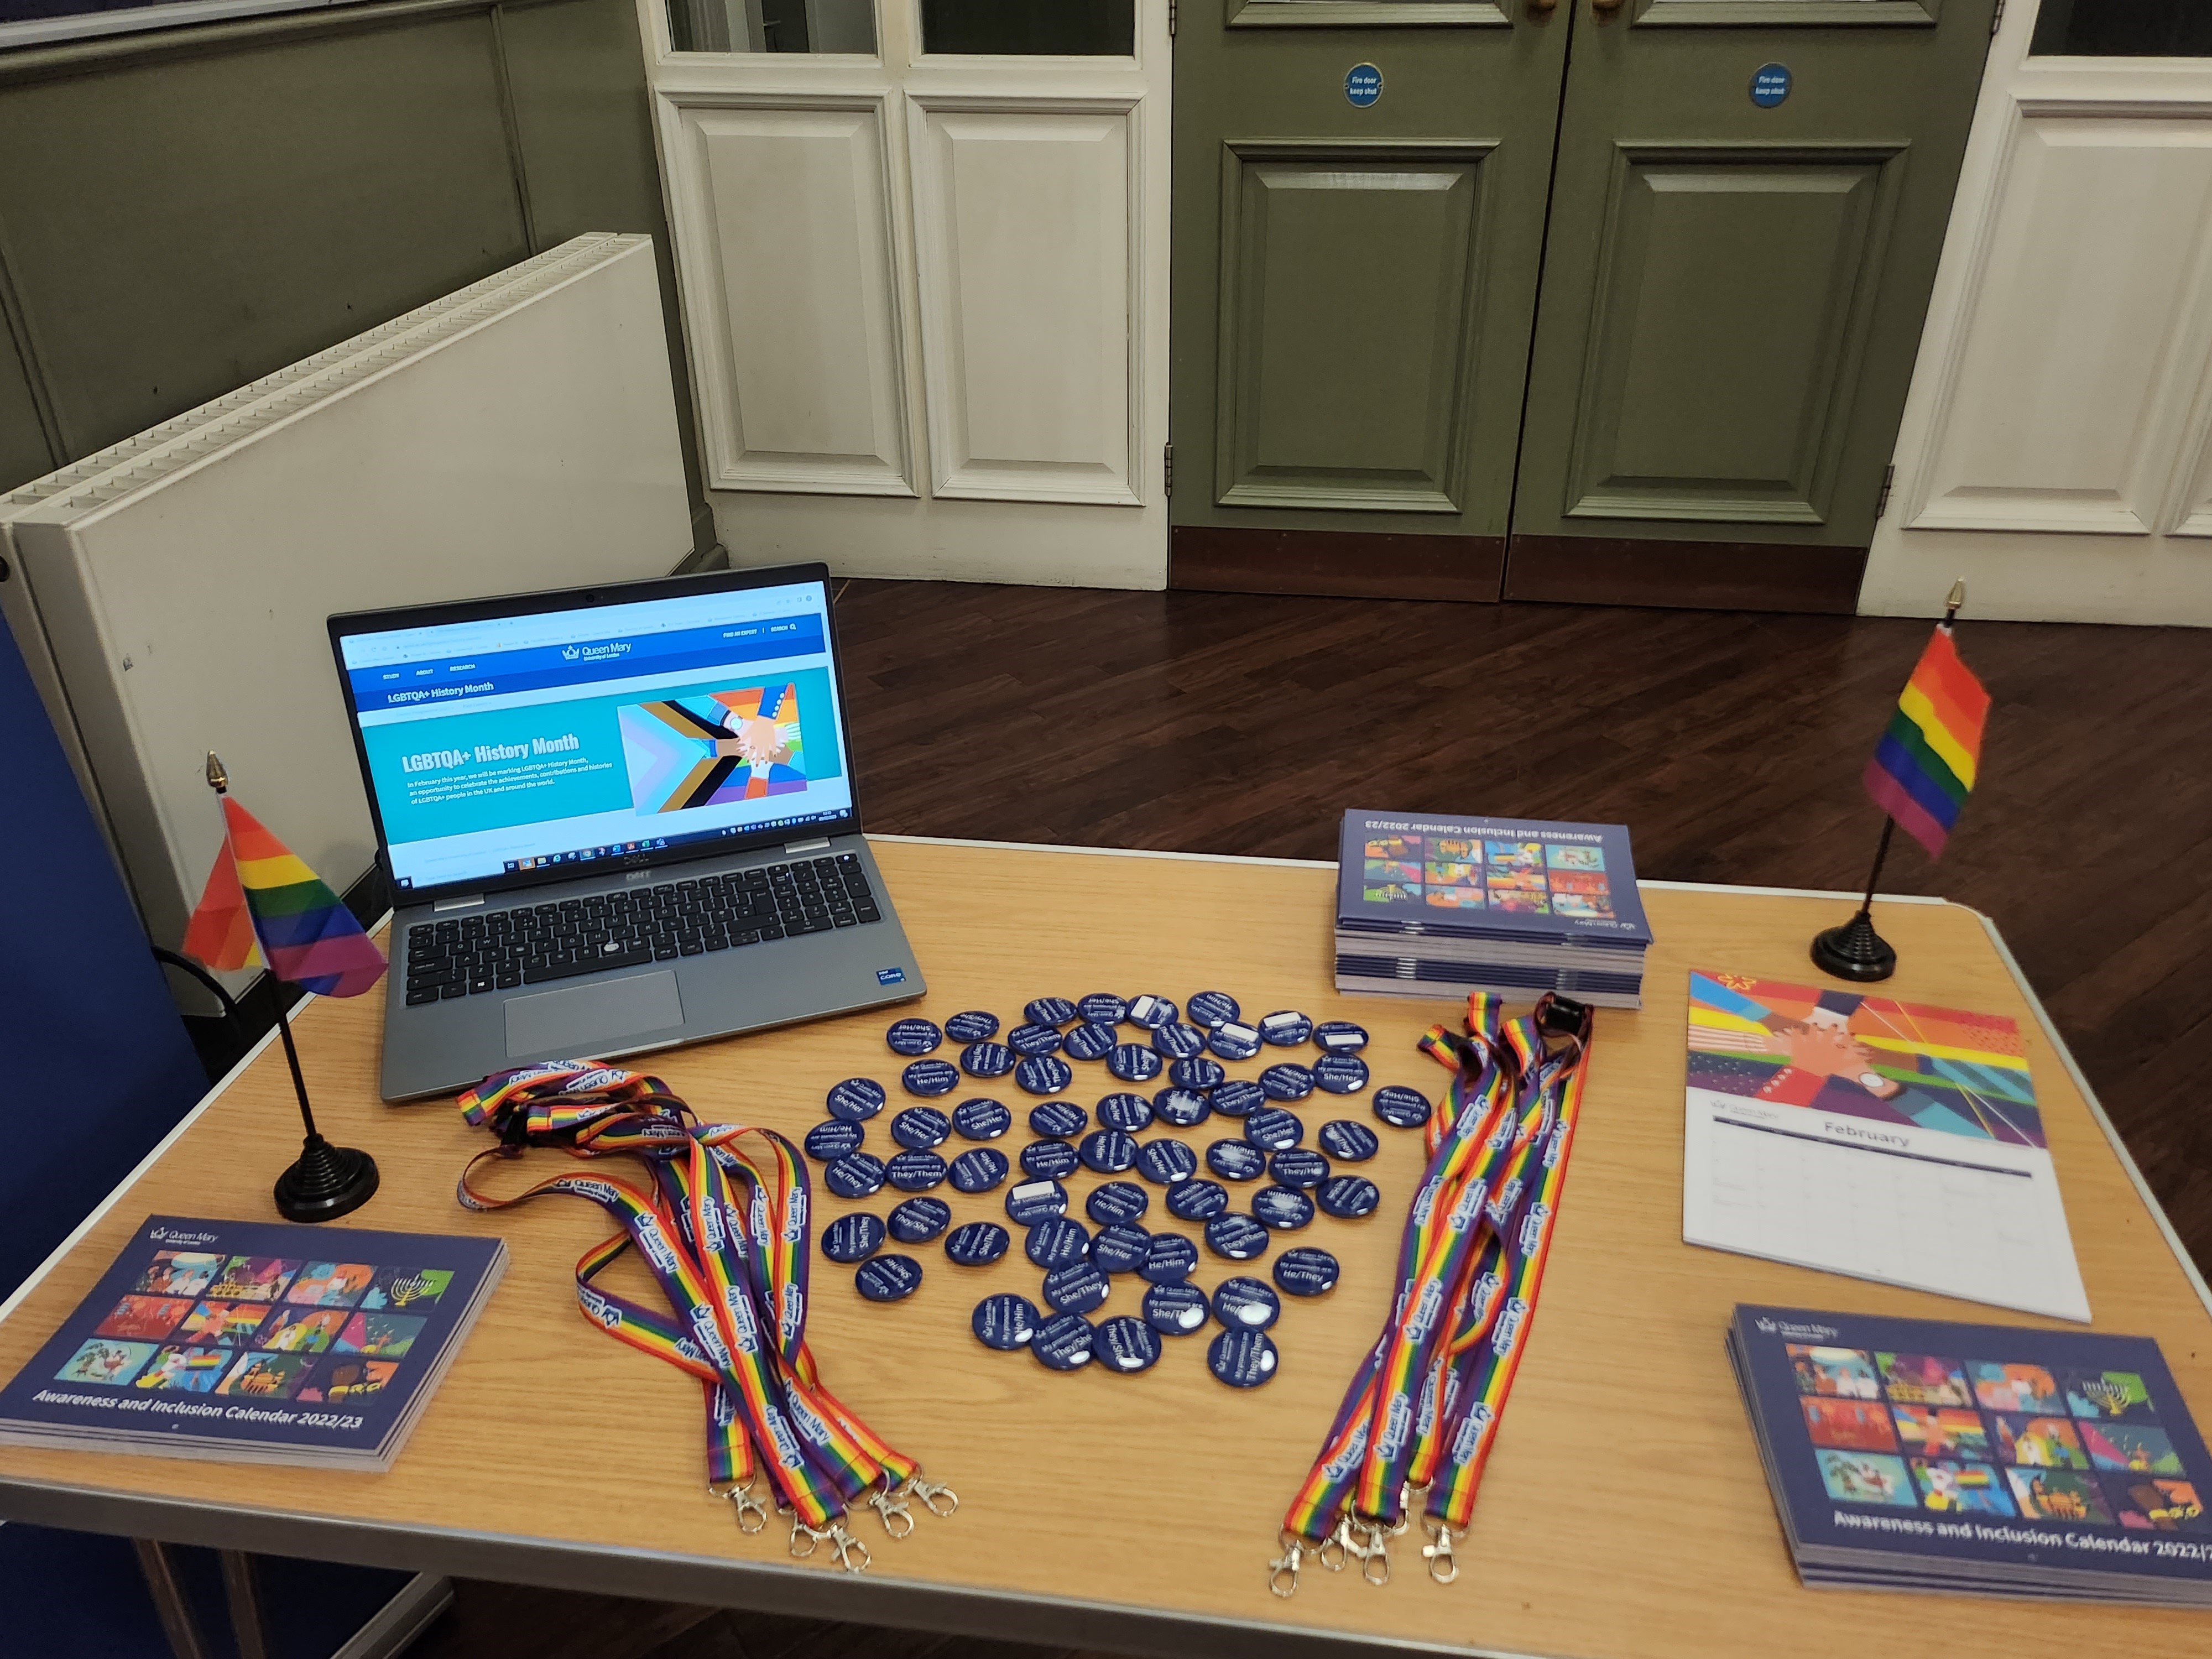 Photo of a desk with Rainbow lanyards, pronoun badges, Inclusion & Awareness calendars, Pride flags and a laptop displaying the LGBTQA+ History Month webpages